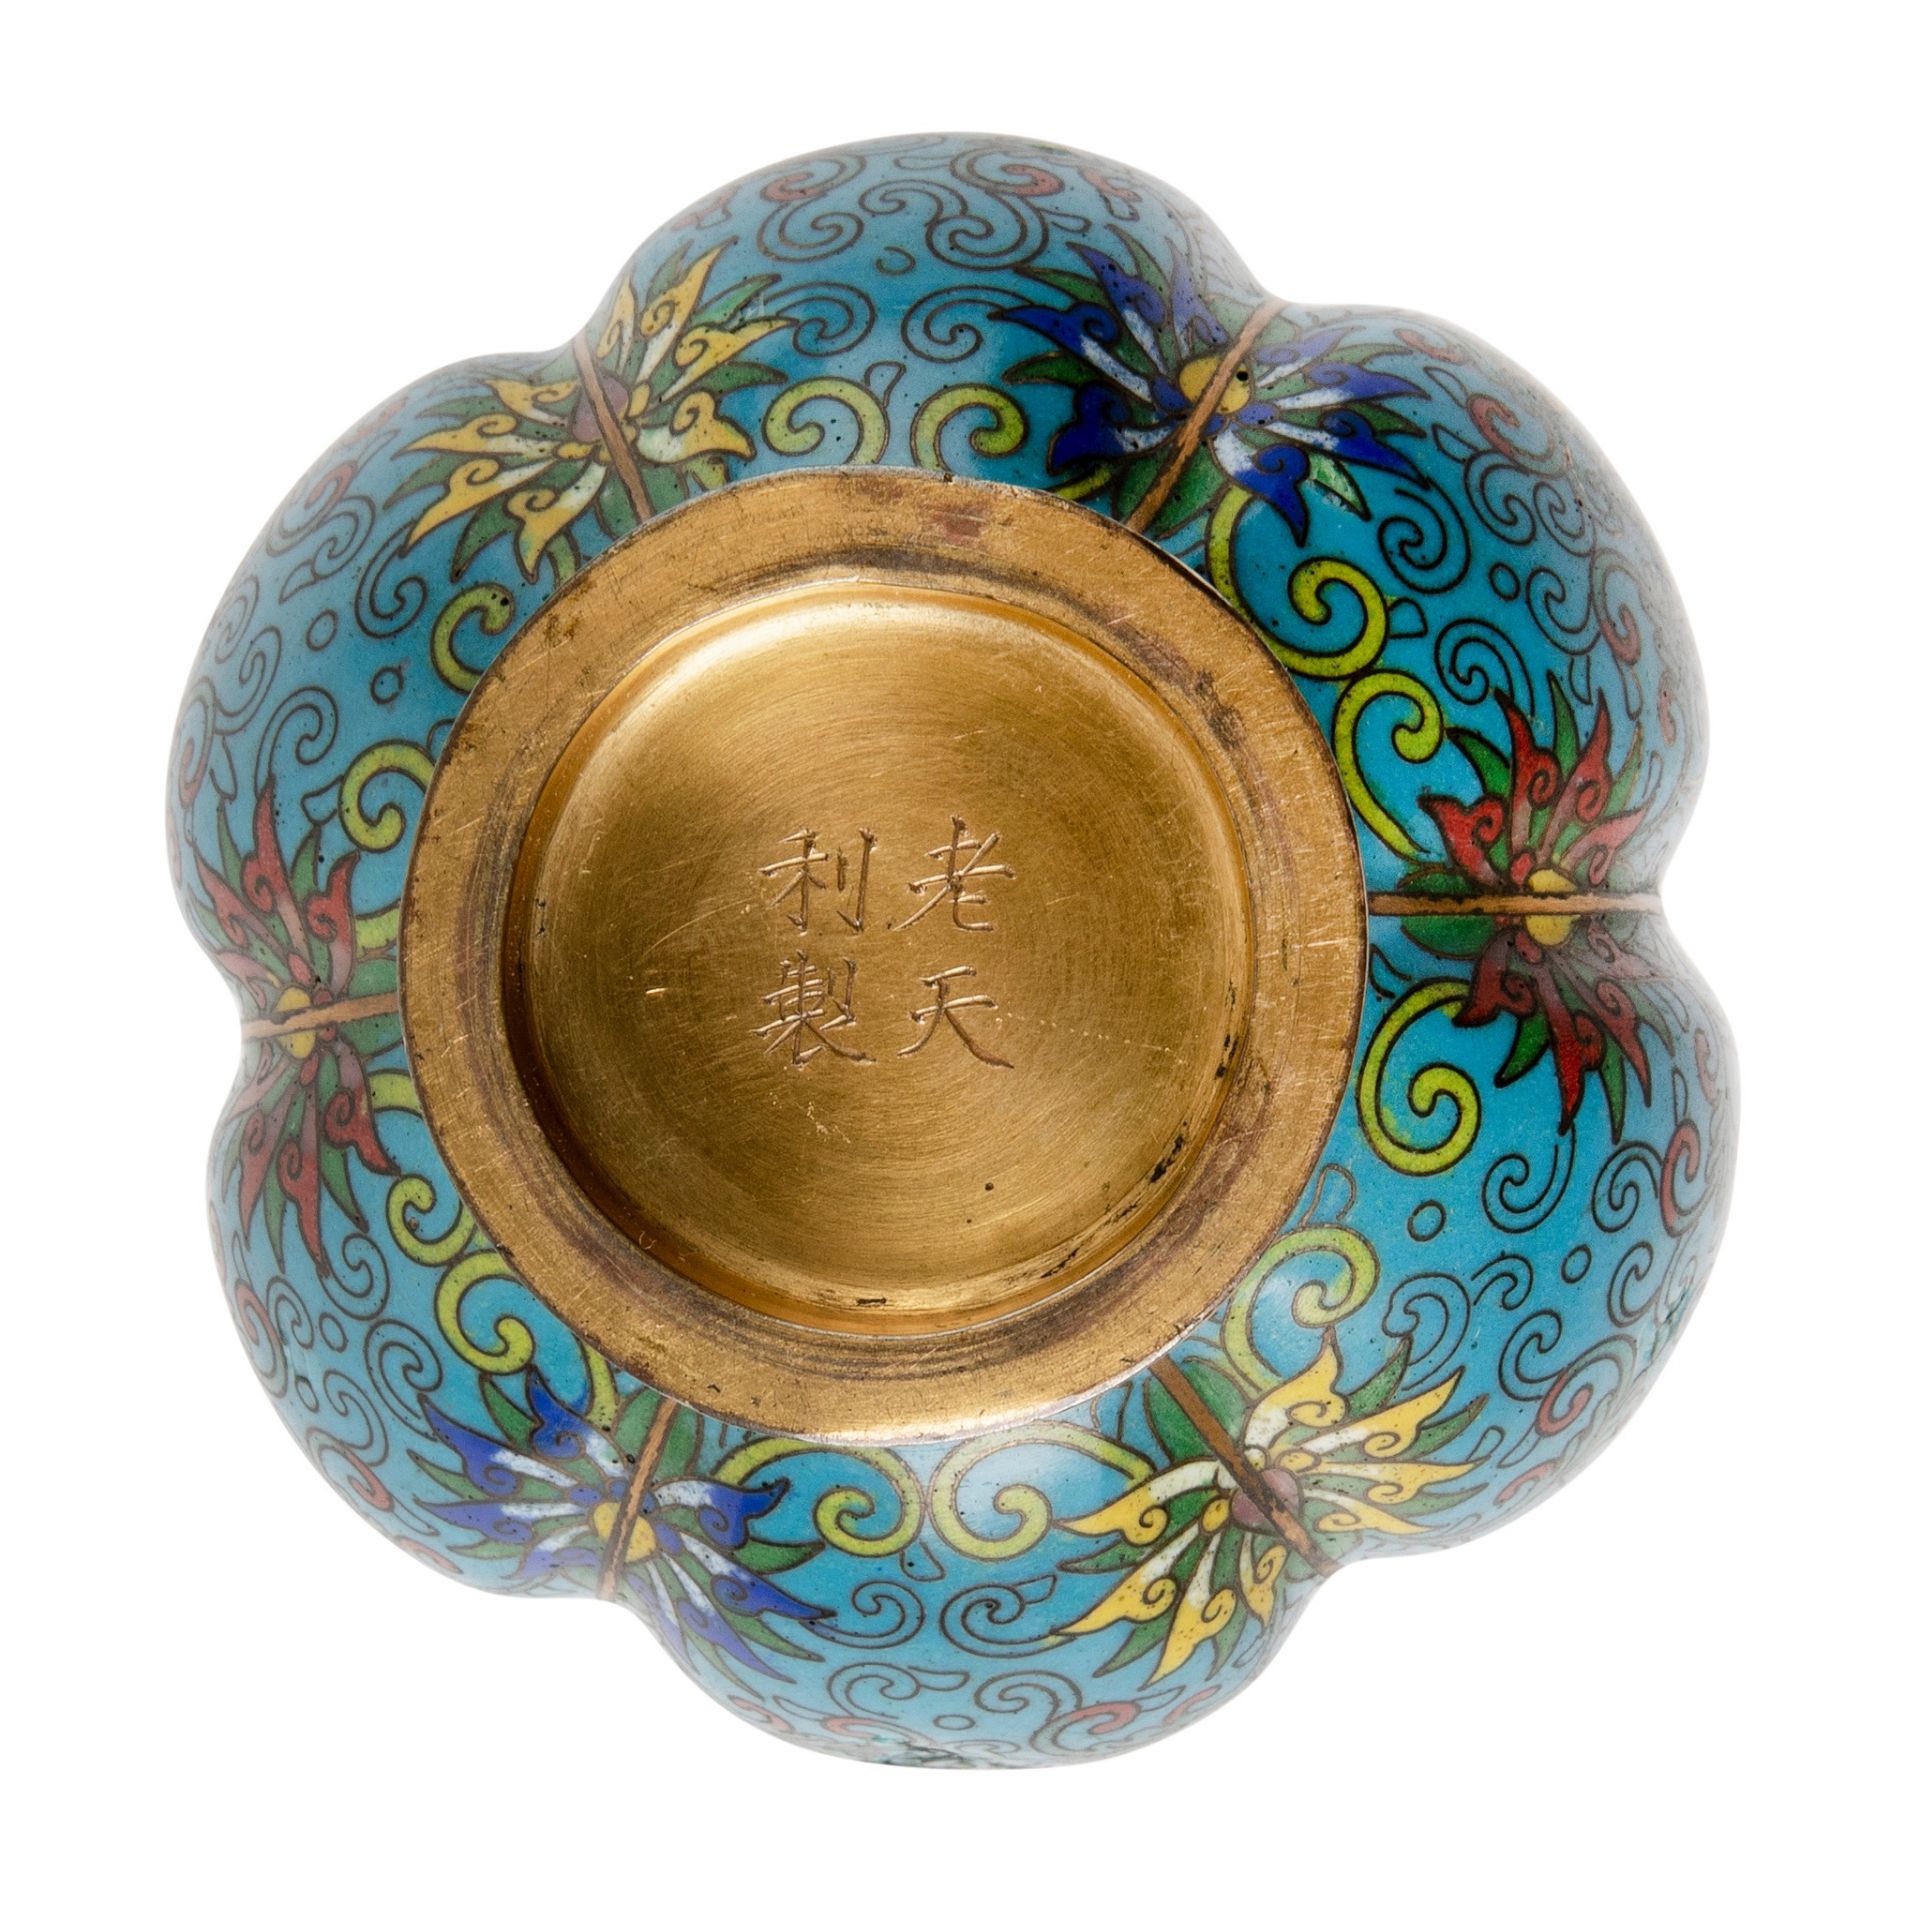 CLOISONNÉ ENAMEL 'LOTUS' VASE LATE QING DYNASTY-REPUBLIC PERIOD, 19TH-20TH CENTURY - Image 2 of 2